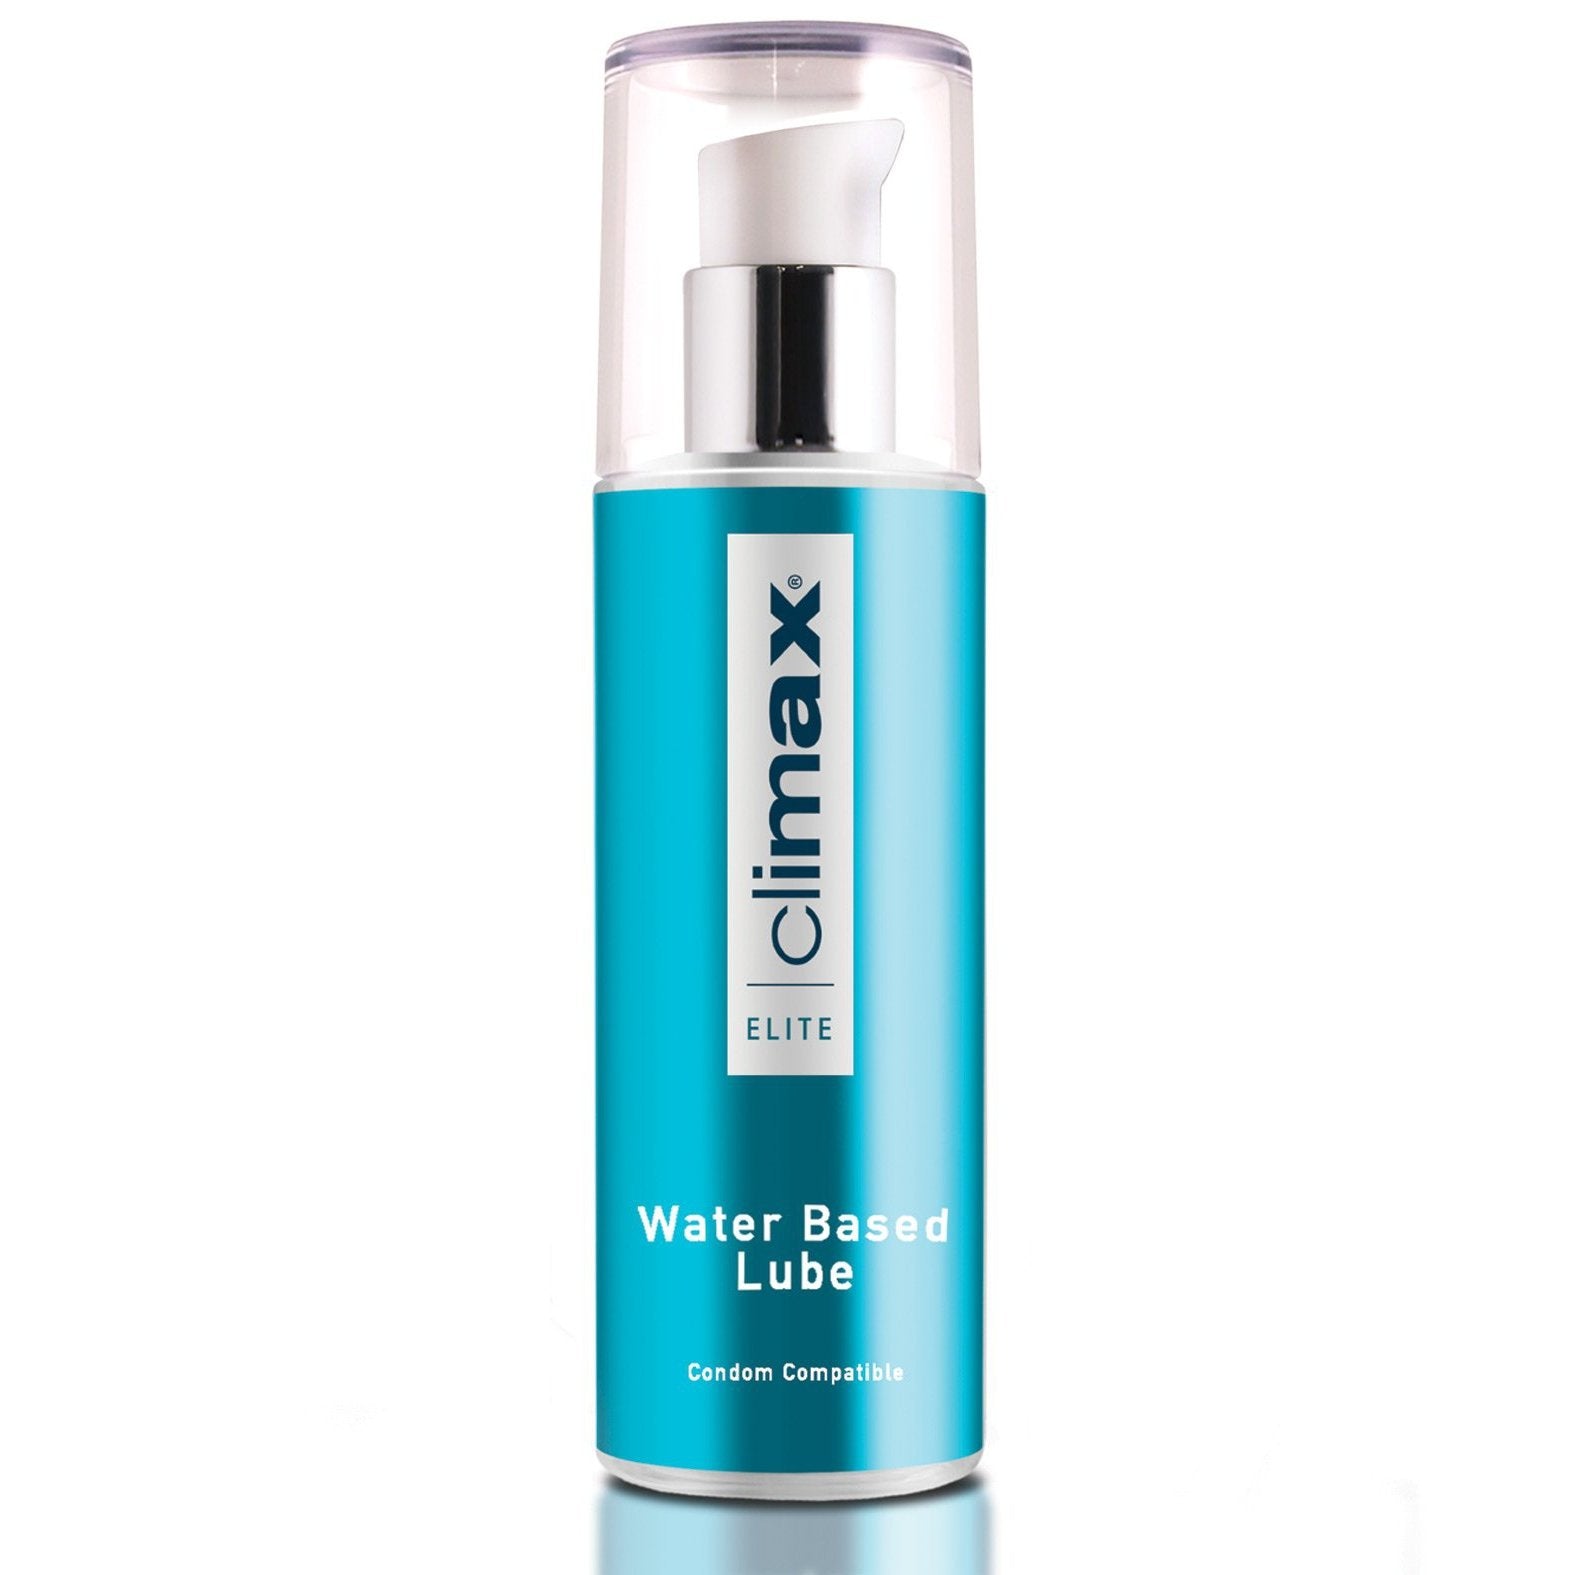 Climax Elite Water Based Lube